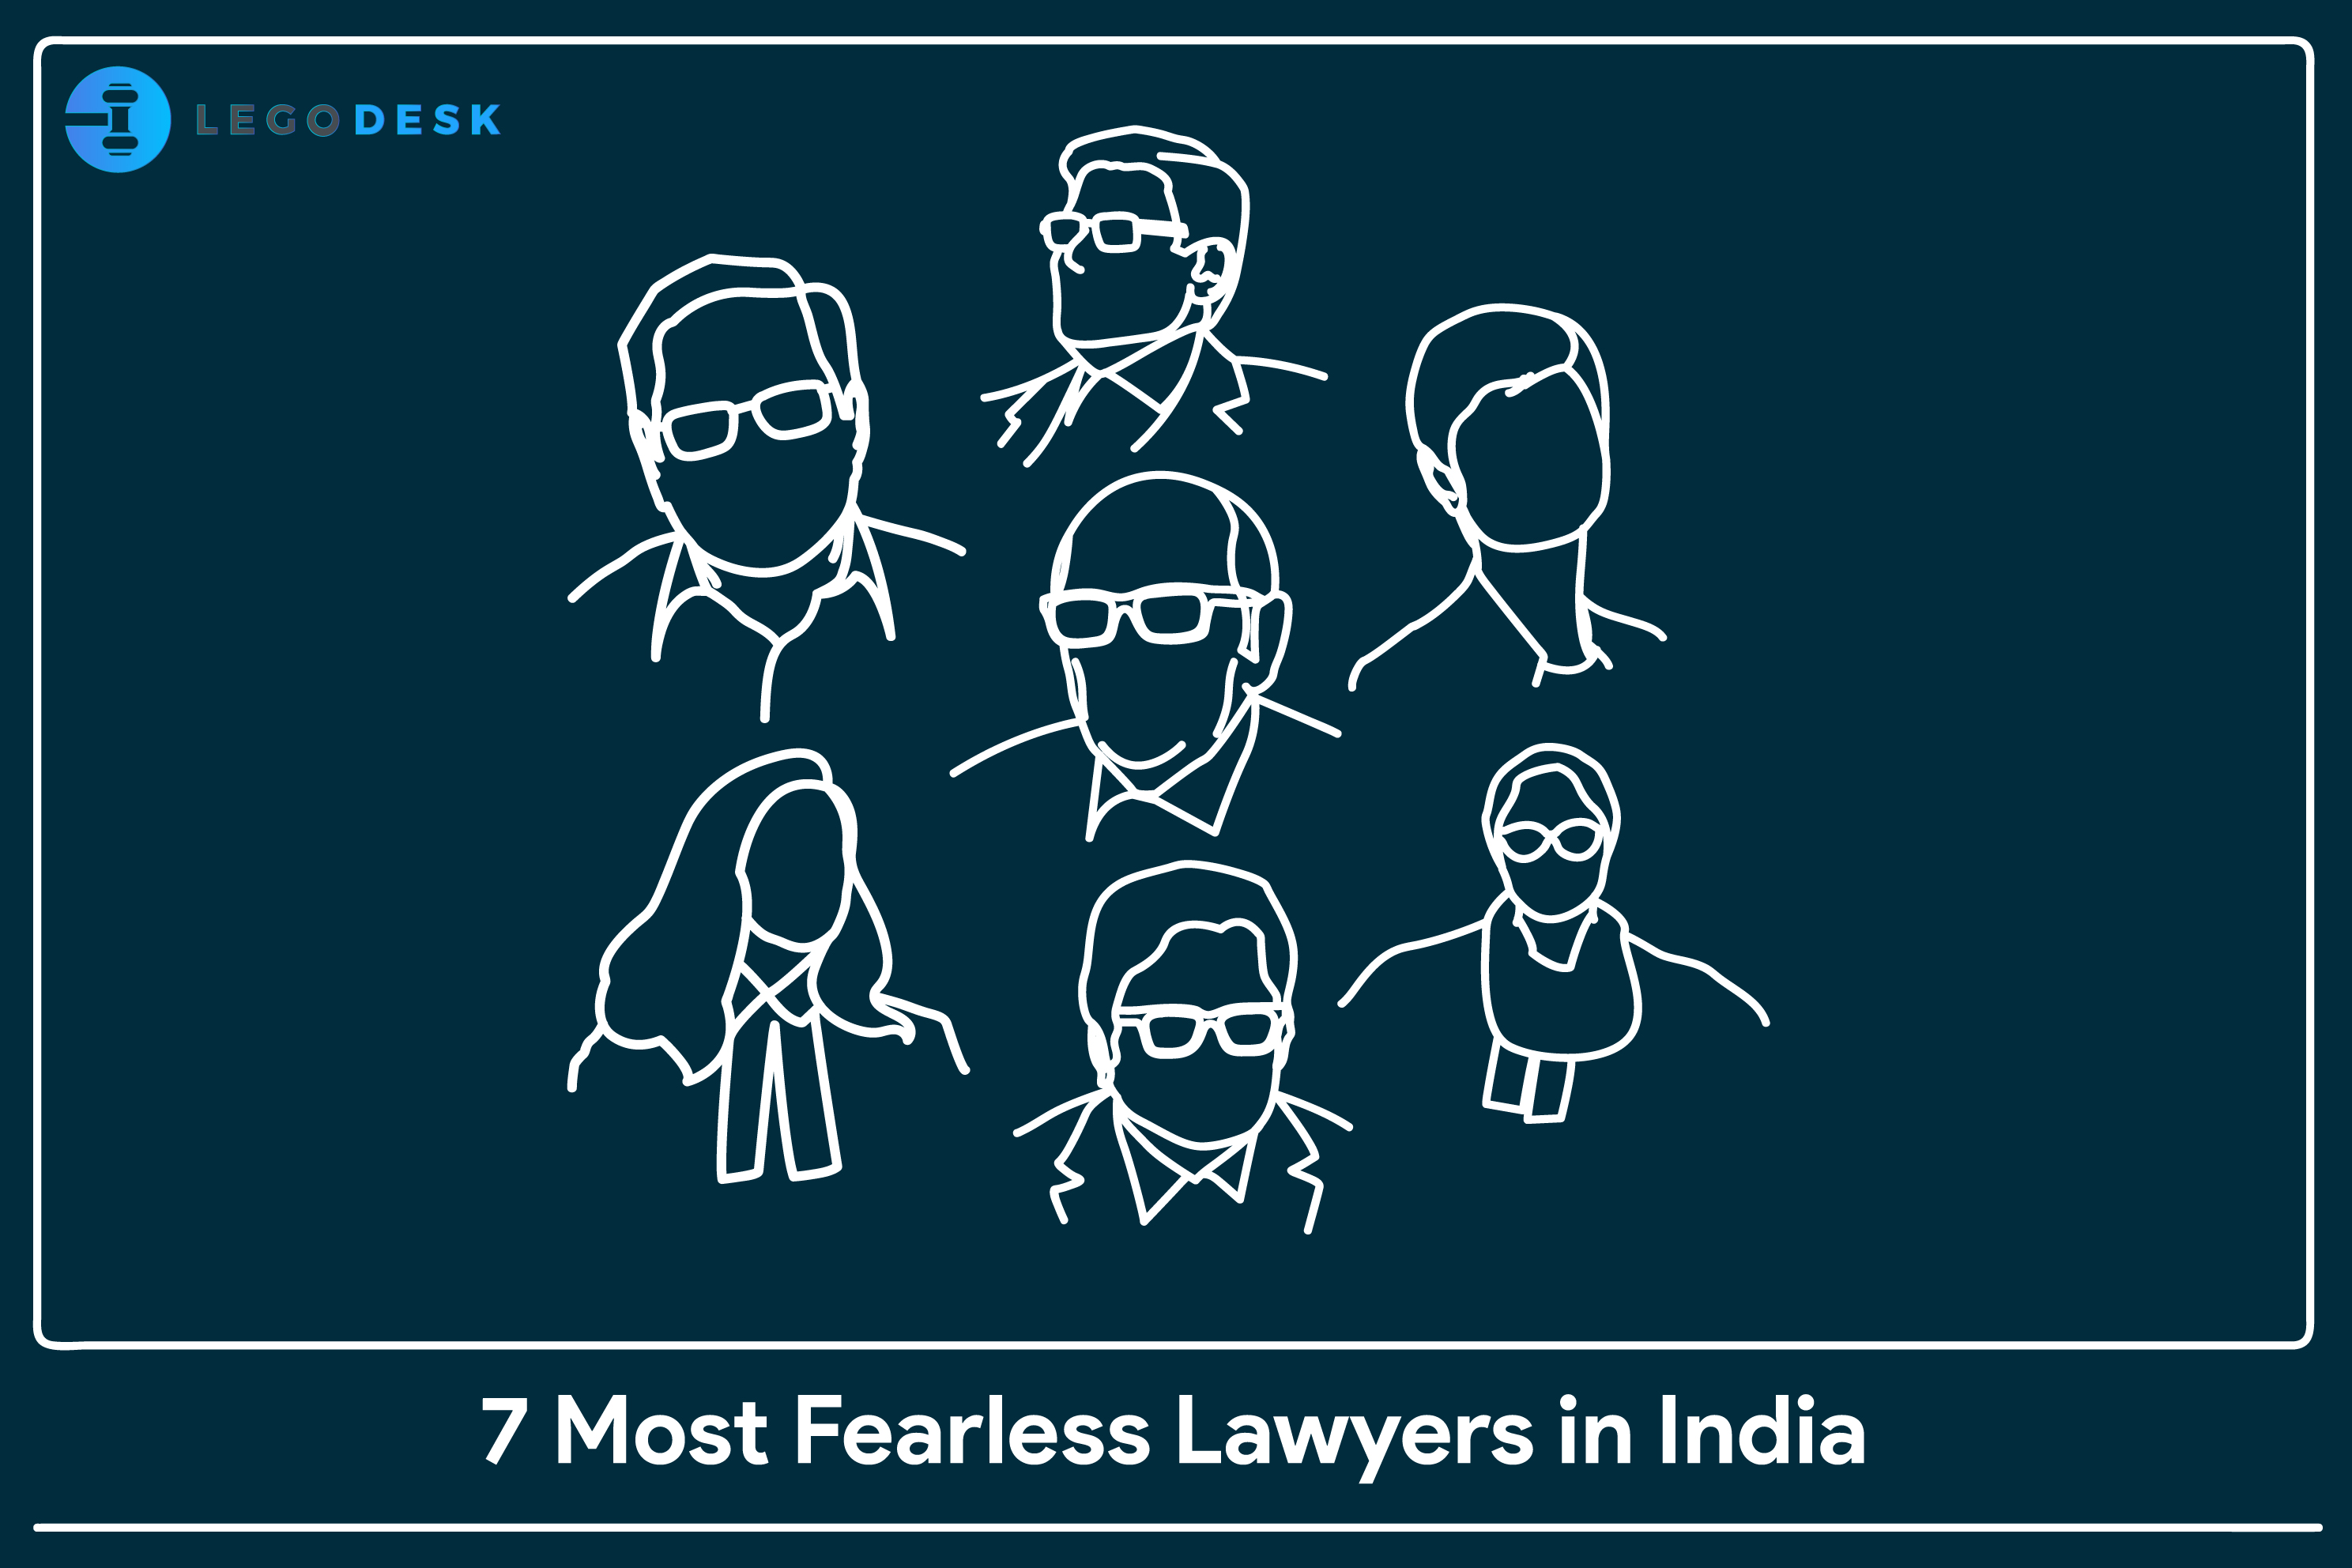 7 most fearless lawyers in India